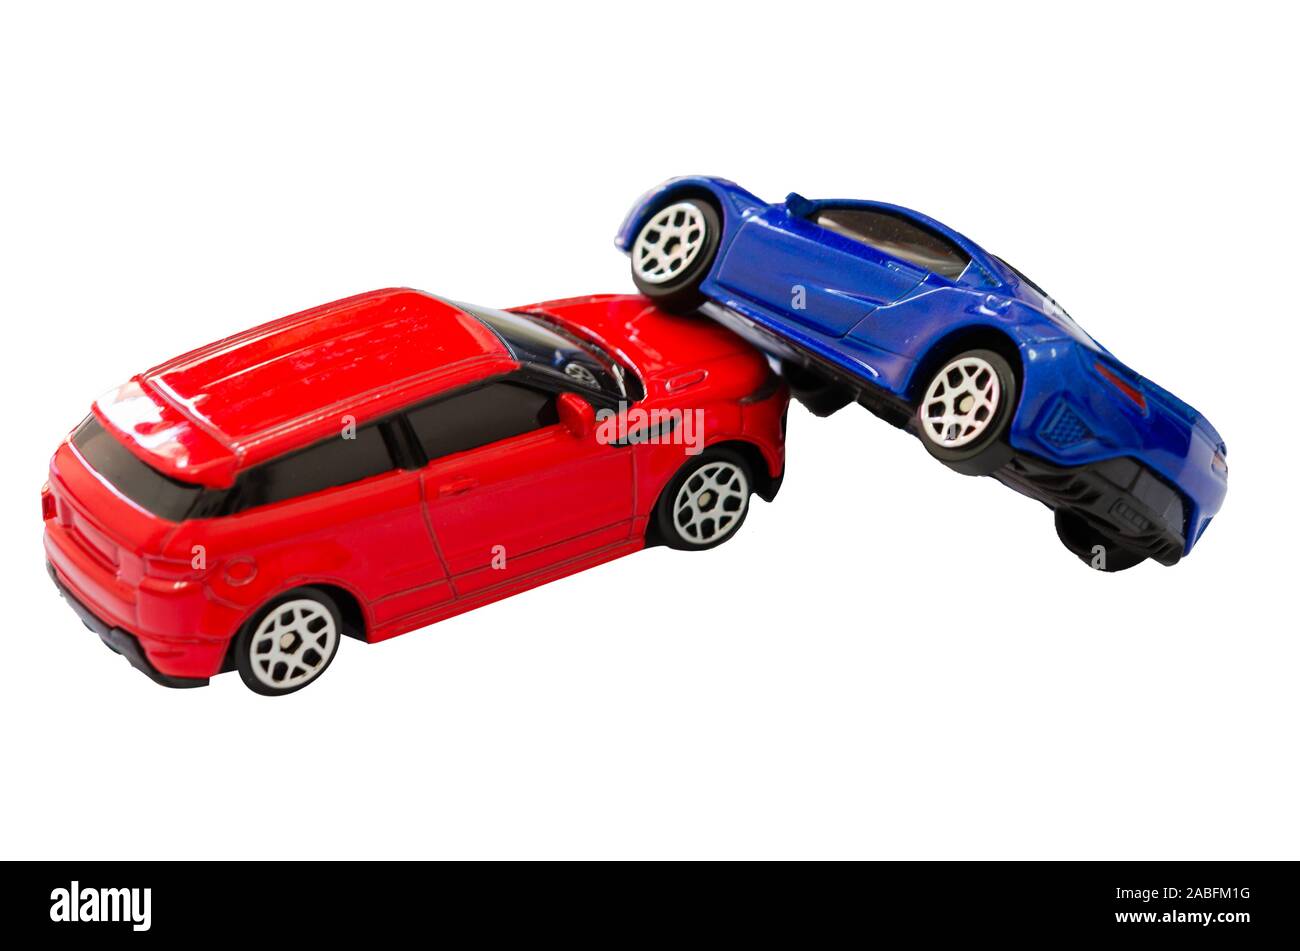 Red and blue toy cars collide on the white background. Stock Photo